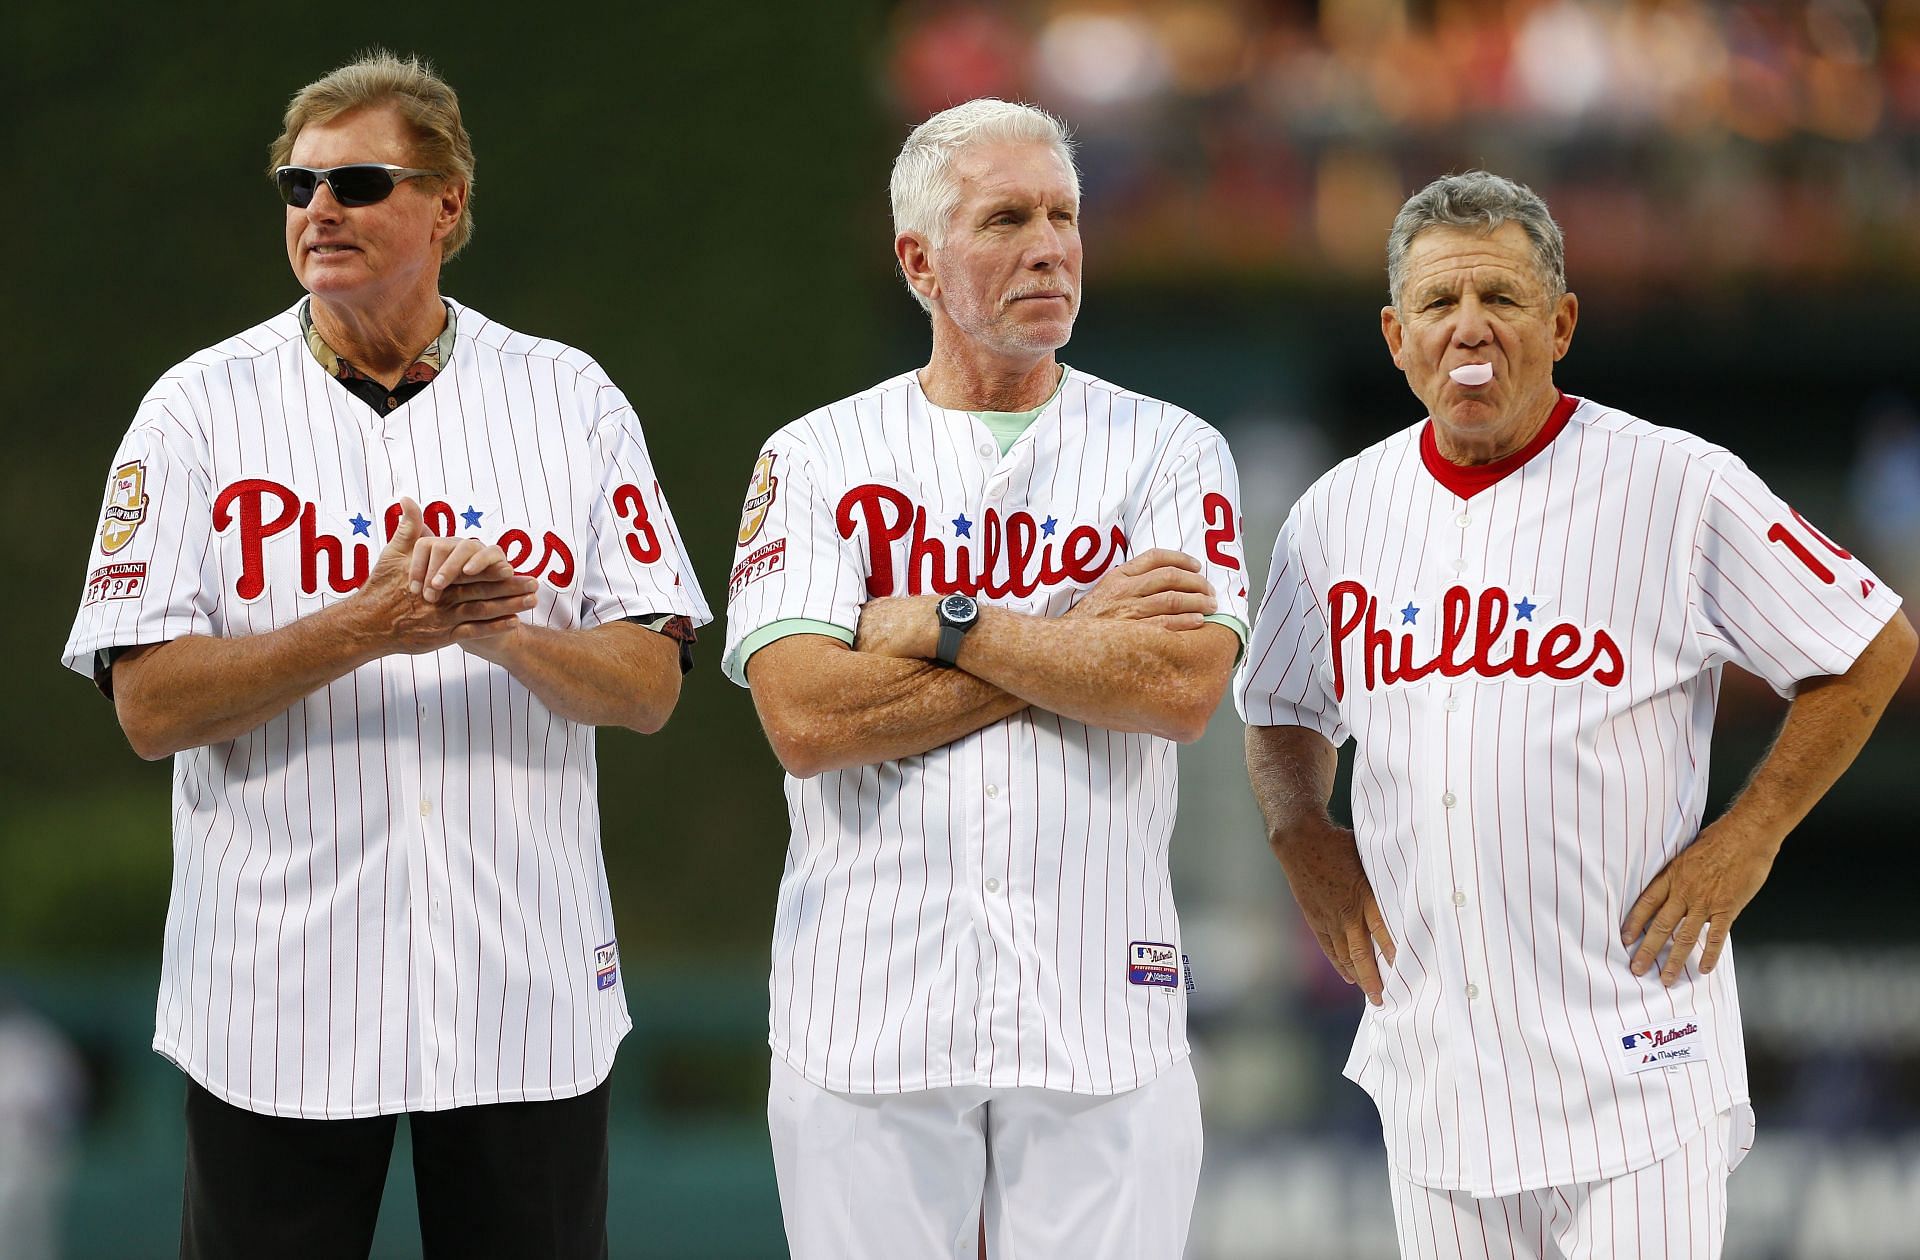 Philadelphia Phillies legend predicts outstanding outcomes for the